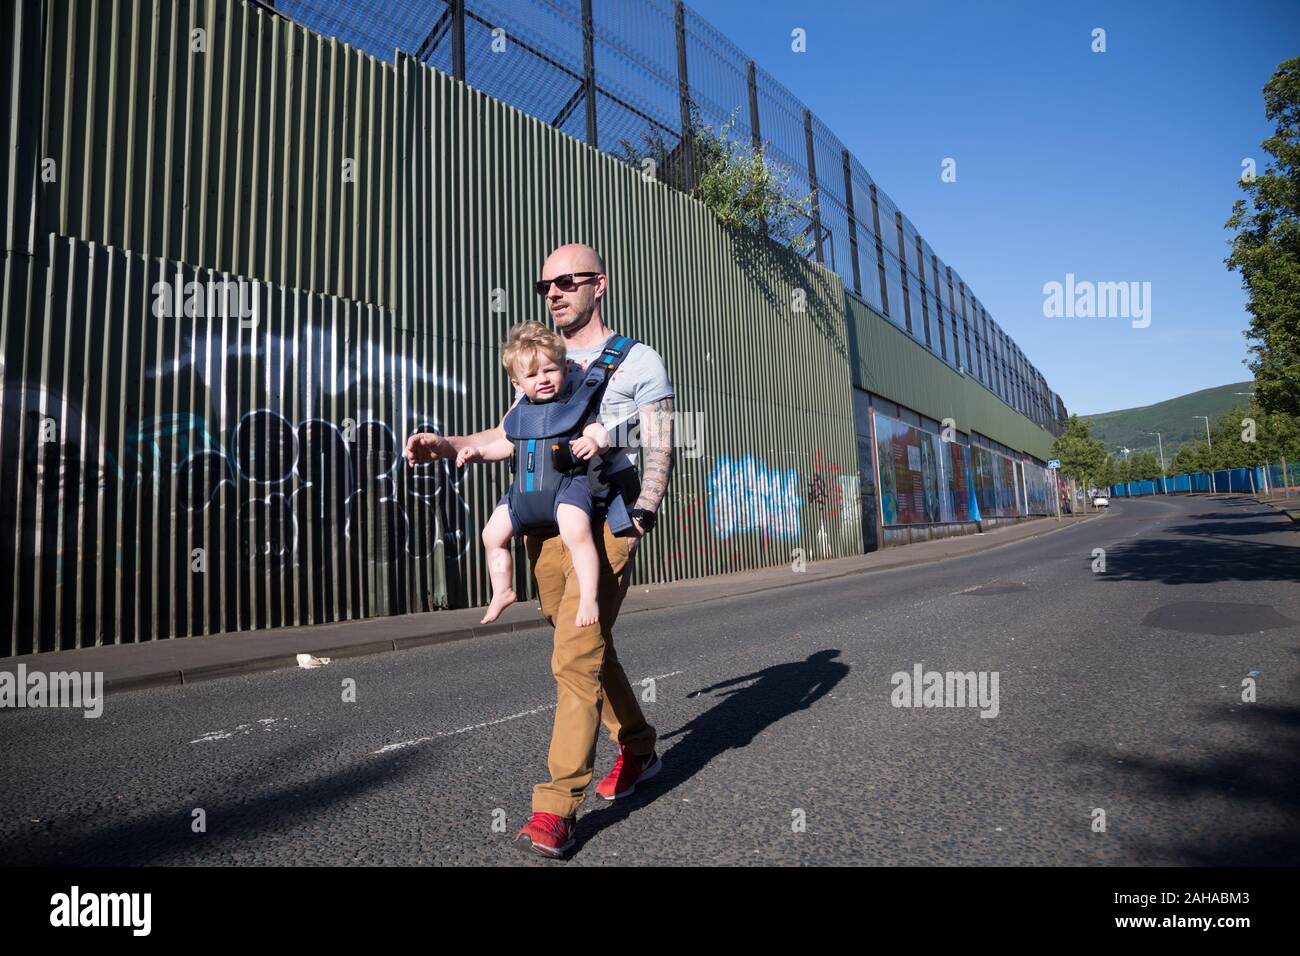 14.07.2019, Belfast, Northern Ireland, Great Britain - Protestant part of West Belfast (Cupar Way), the Peace Wall divides neighbourhoods by denominat Stock Photo